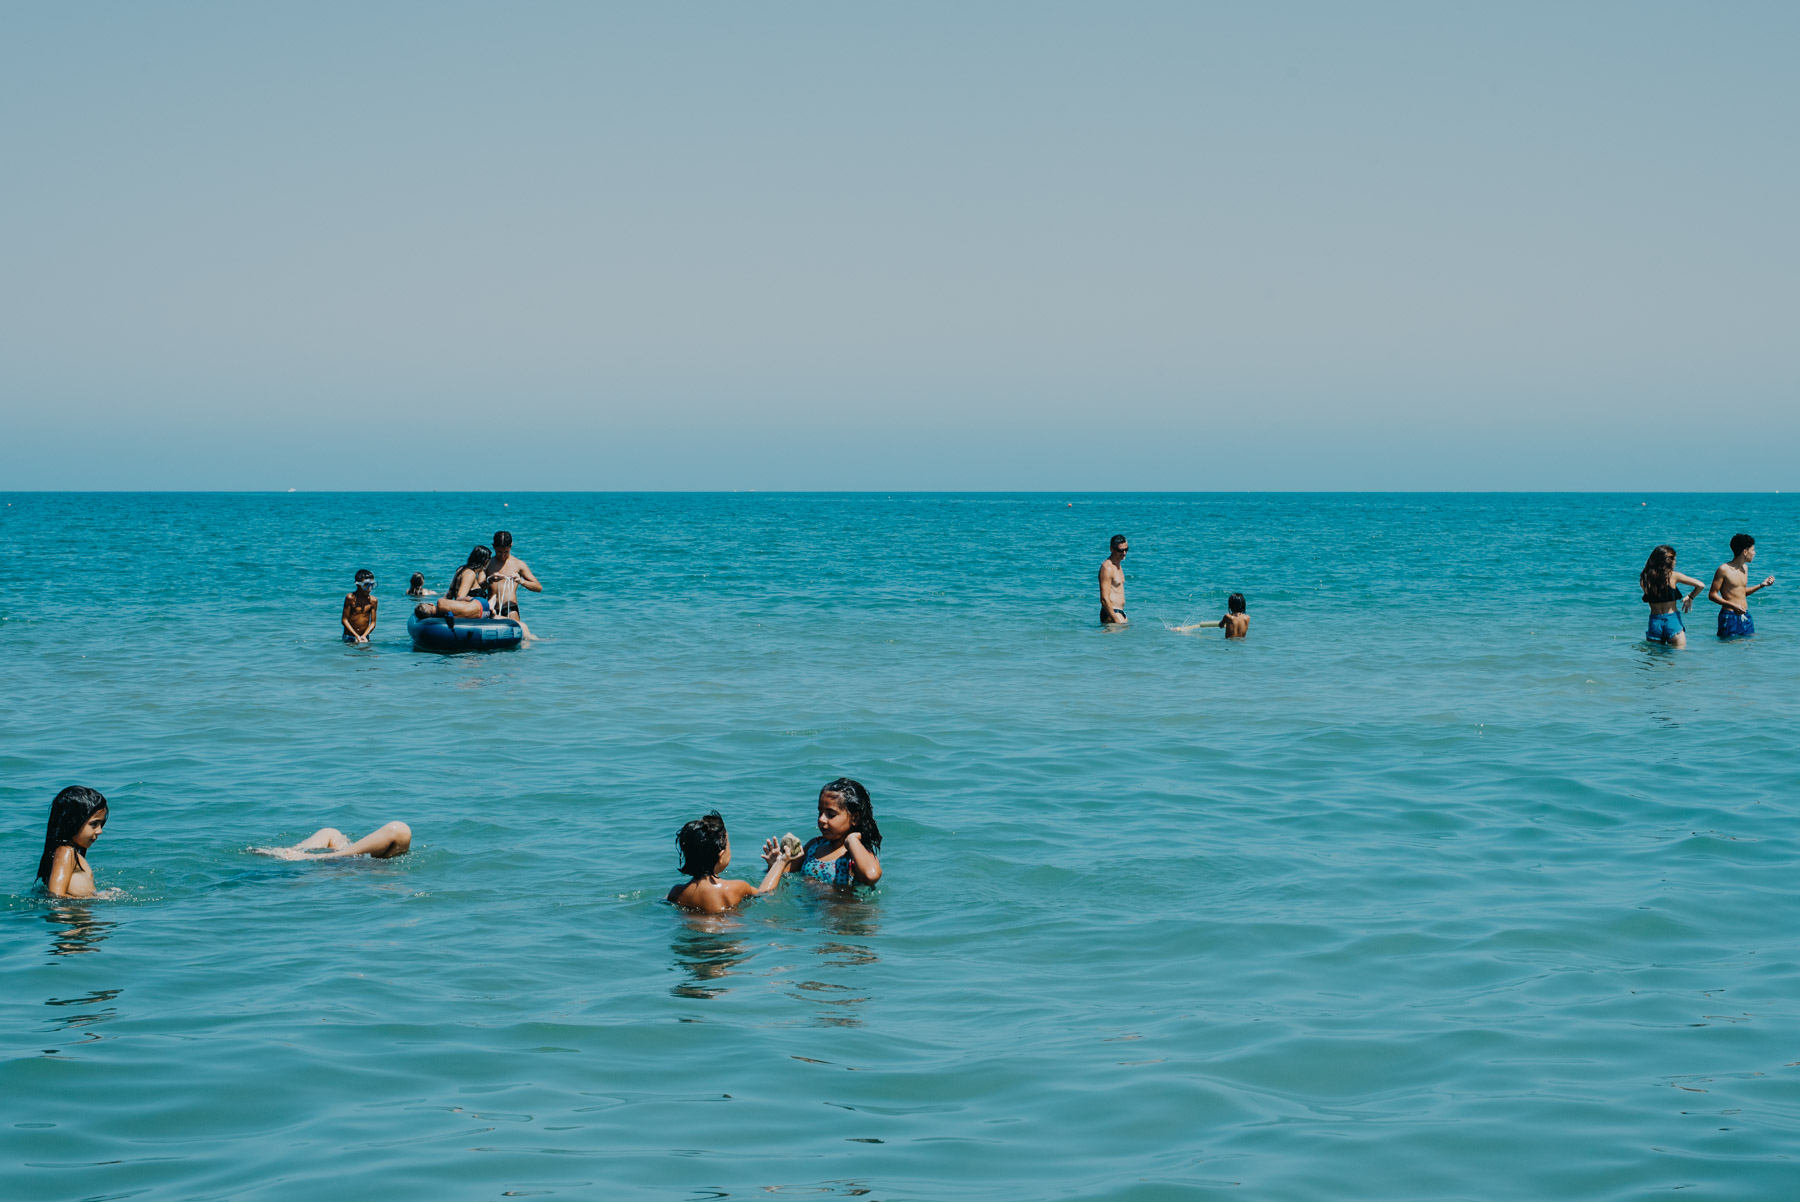 People anche children playing at the beach in the blue sea in the mediterranean sea in the city of Barletta, Apulia